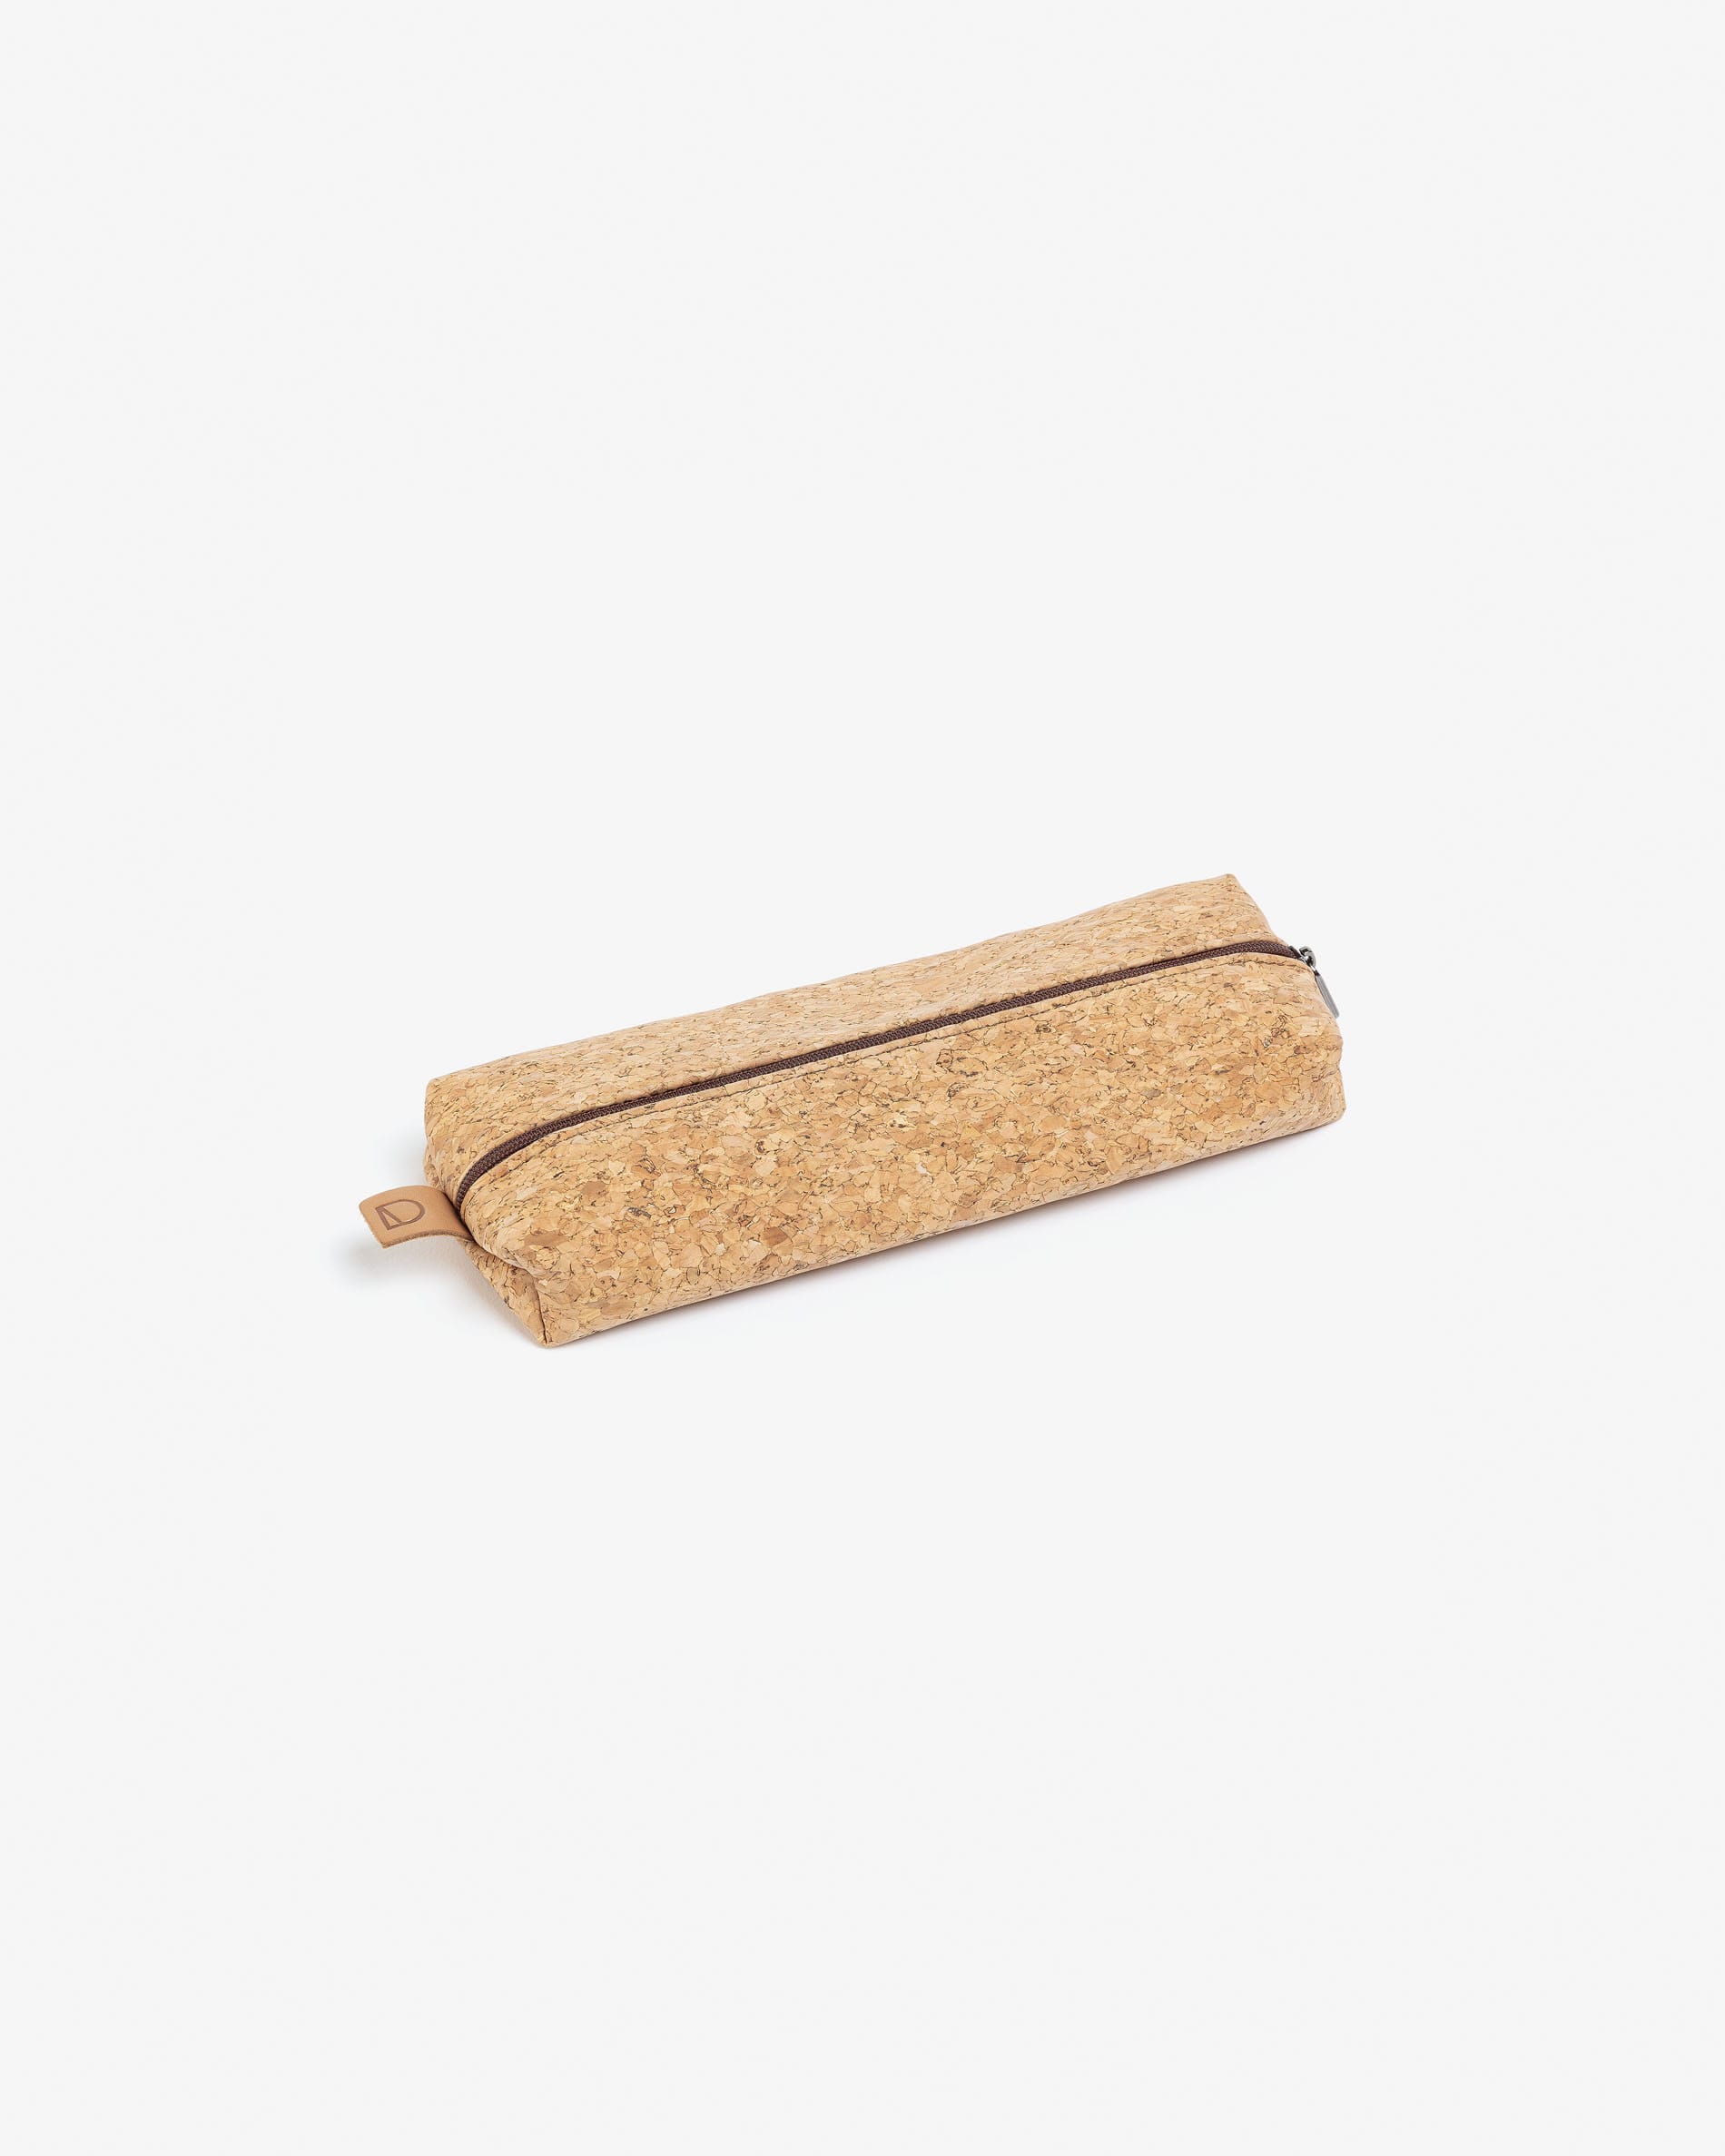 Pencil Case Foa made of natural cork with zipper